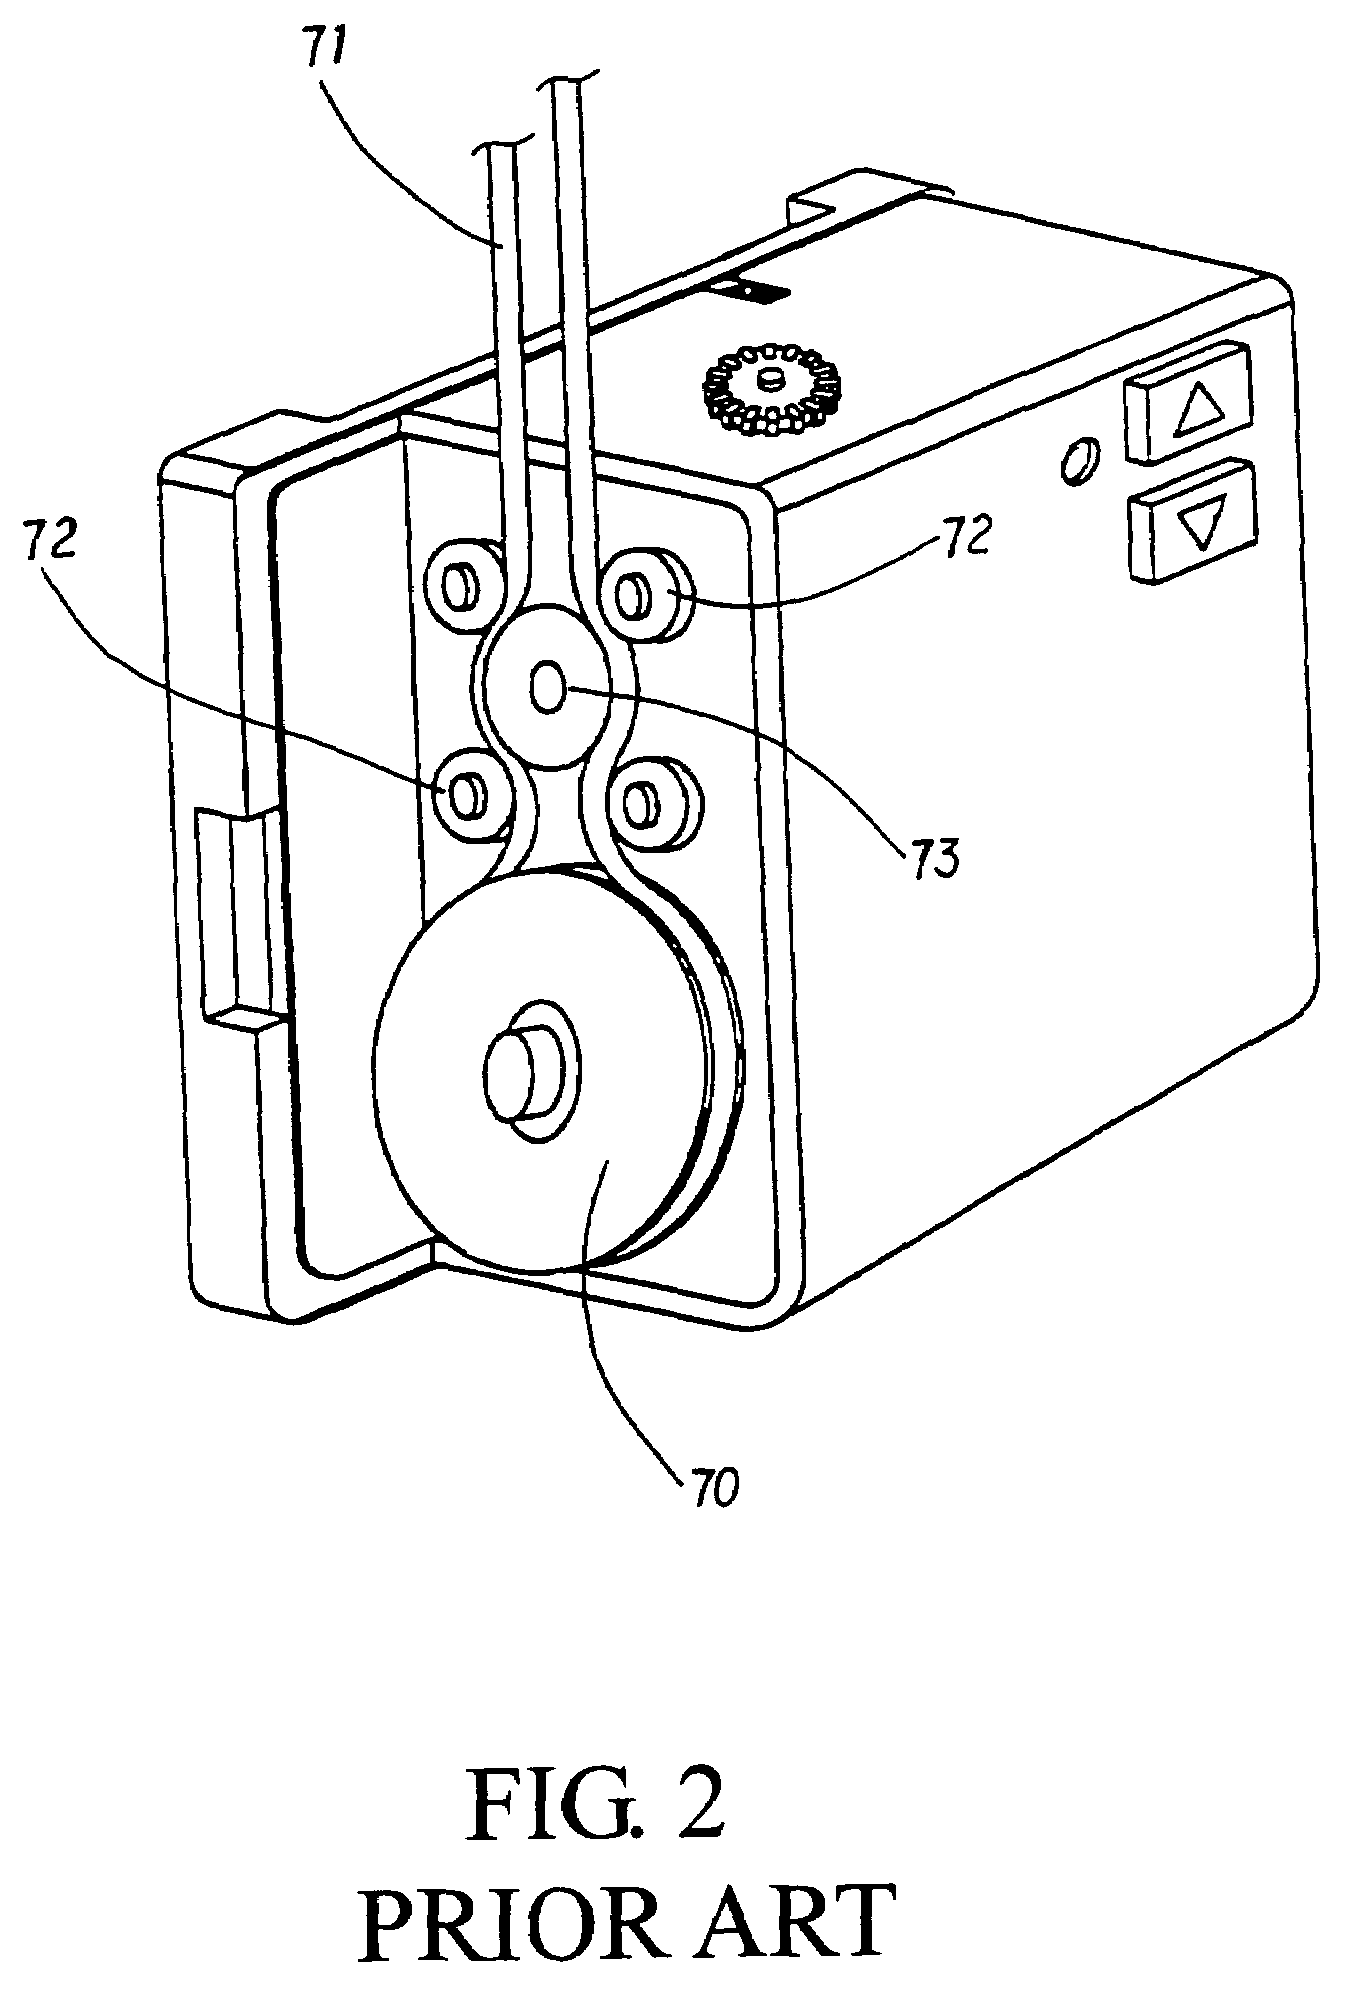 Electric transmission module for module for window curtains having winding wheel